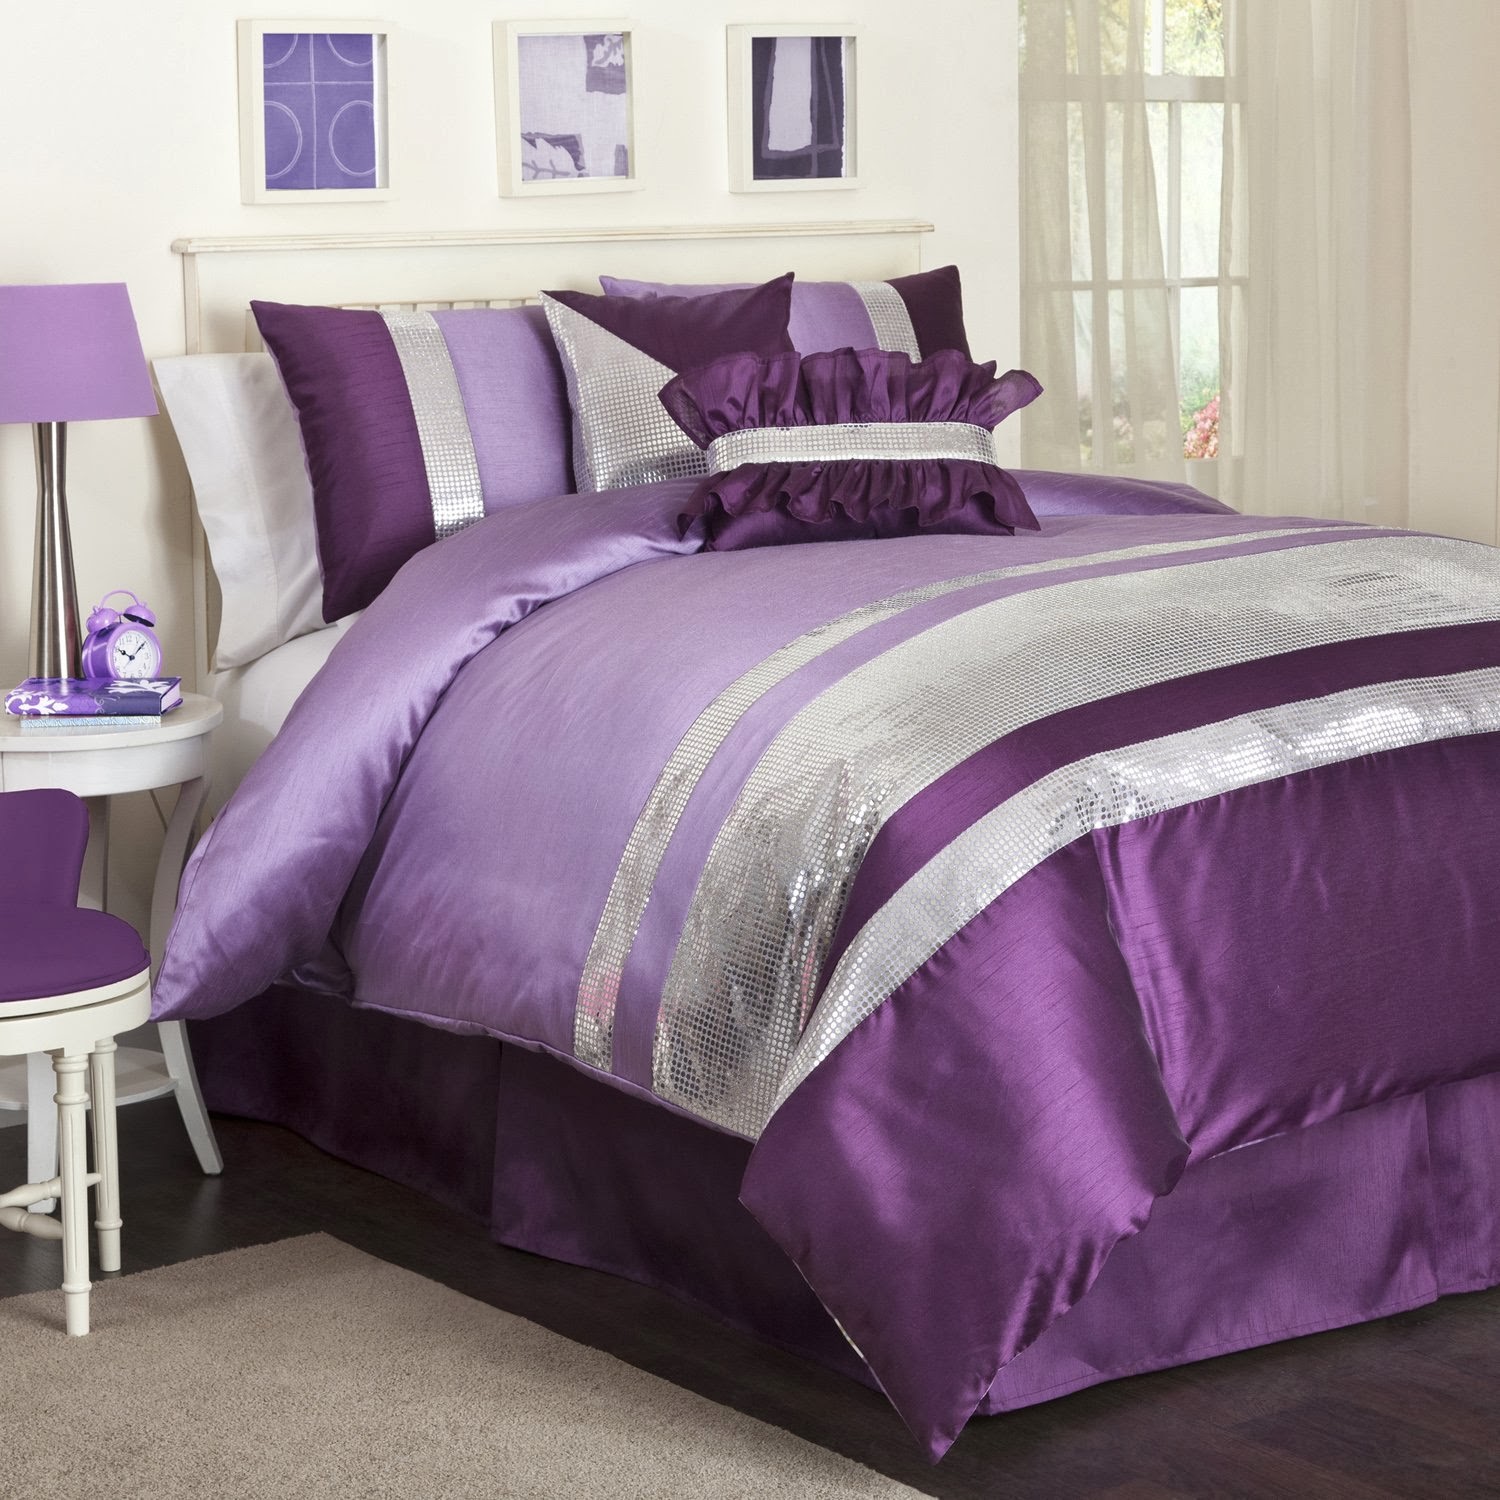 Buy Best And Beautiful Bedding Sets On Sale Purple  